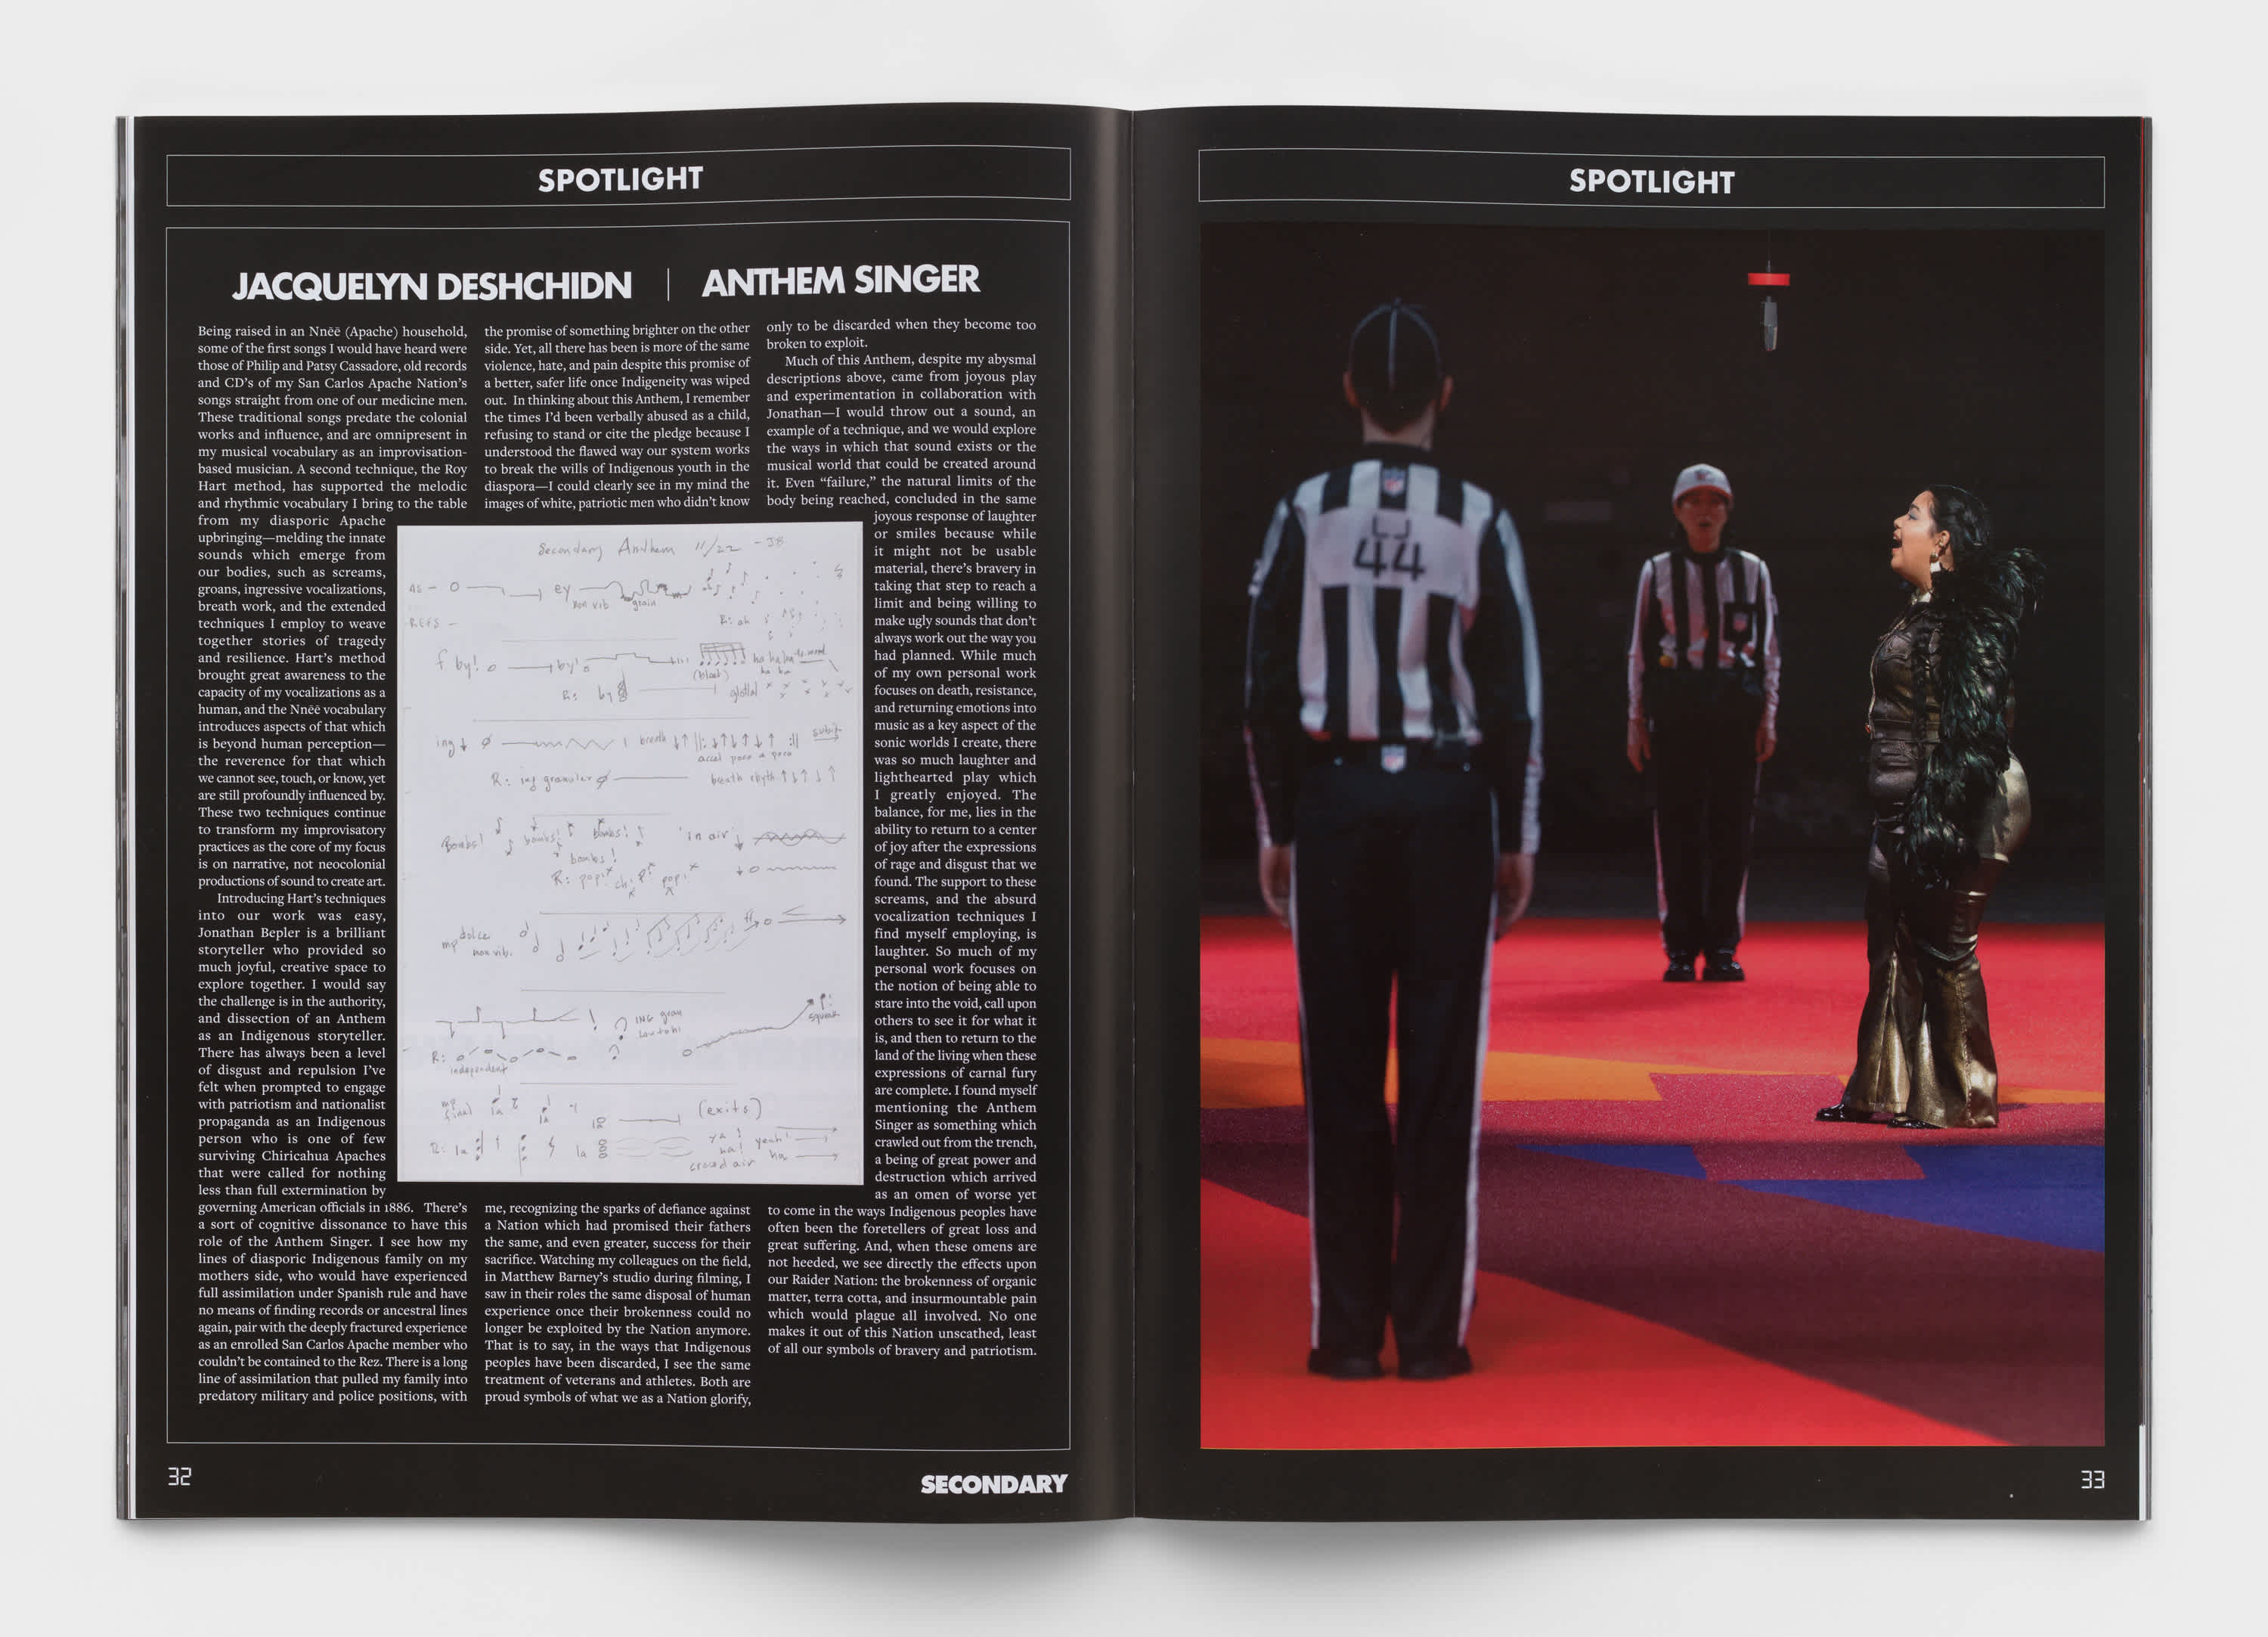 Book interior which features a full page of text on the left and an image from the installation, 'Secondary' by Matthew Barney on the right. The text is white on black background. The image features two referees on a red, orange and blue carpet. A woman in a black dress is in side-profile, singing.